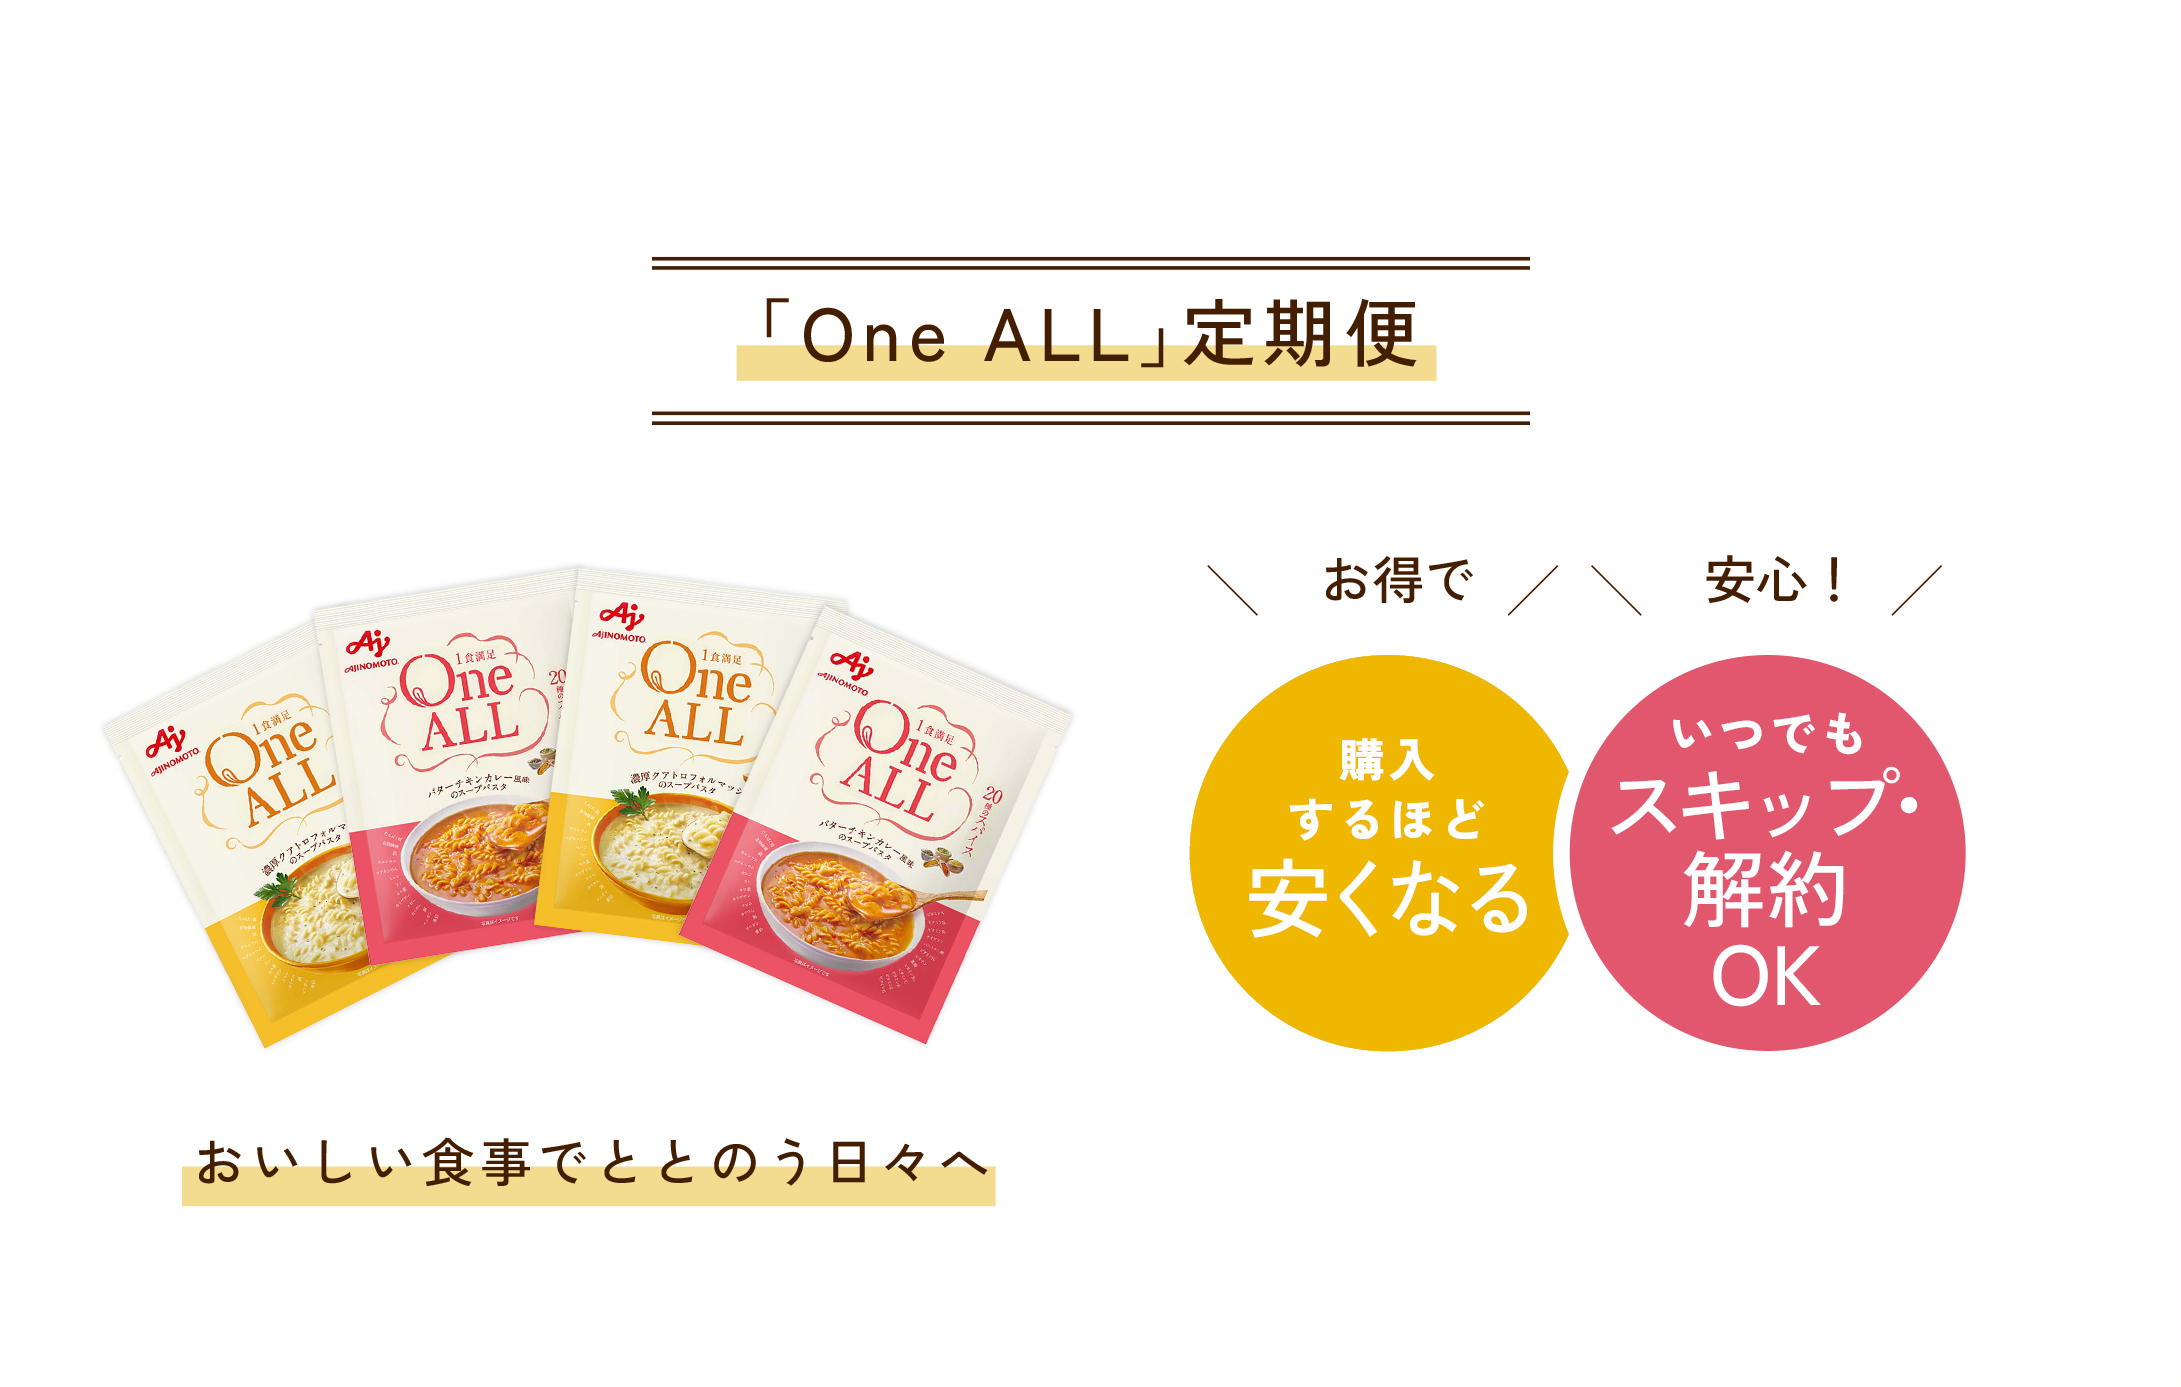 「One ALL」は定期便で　心身ともに健やかな毎日に　定期購入で初回20%OFF　安心！いつでも解約OK